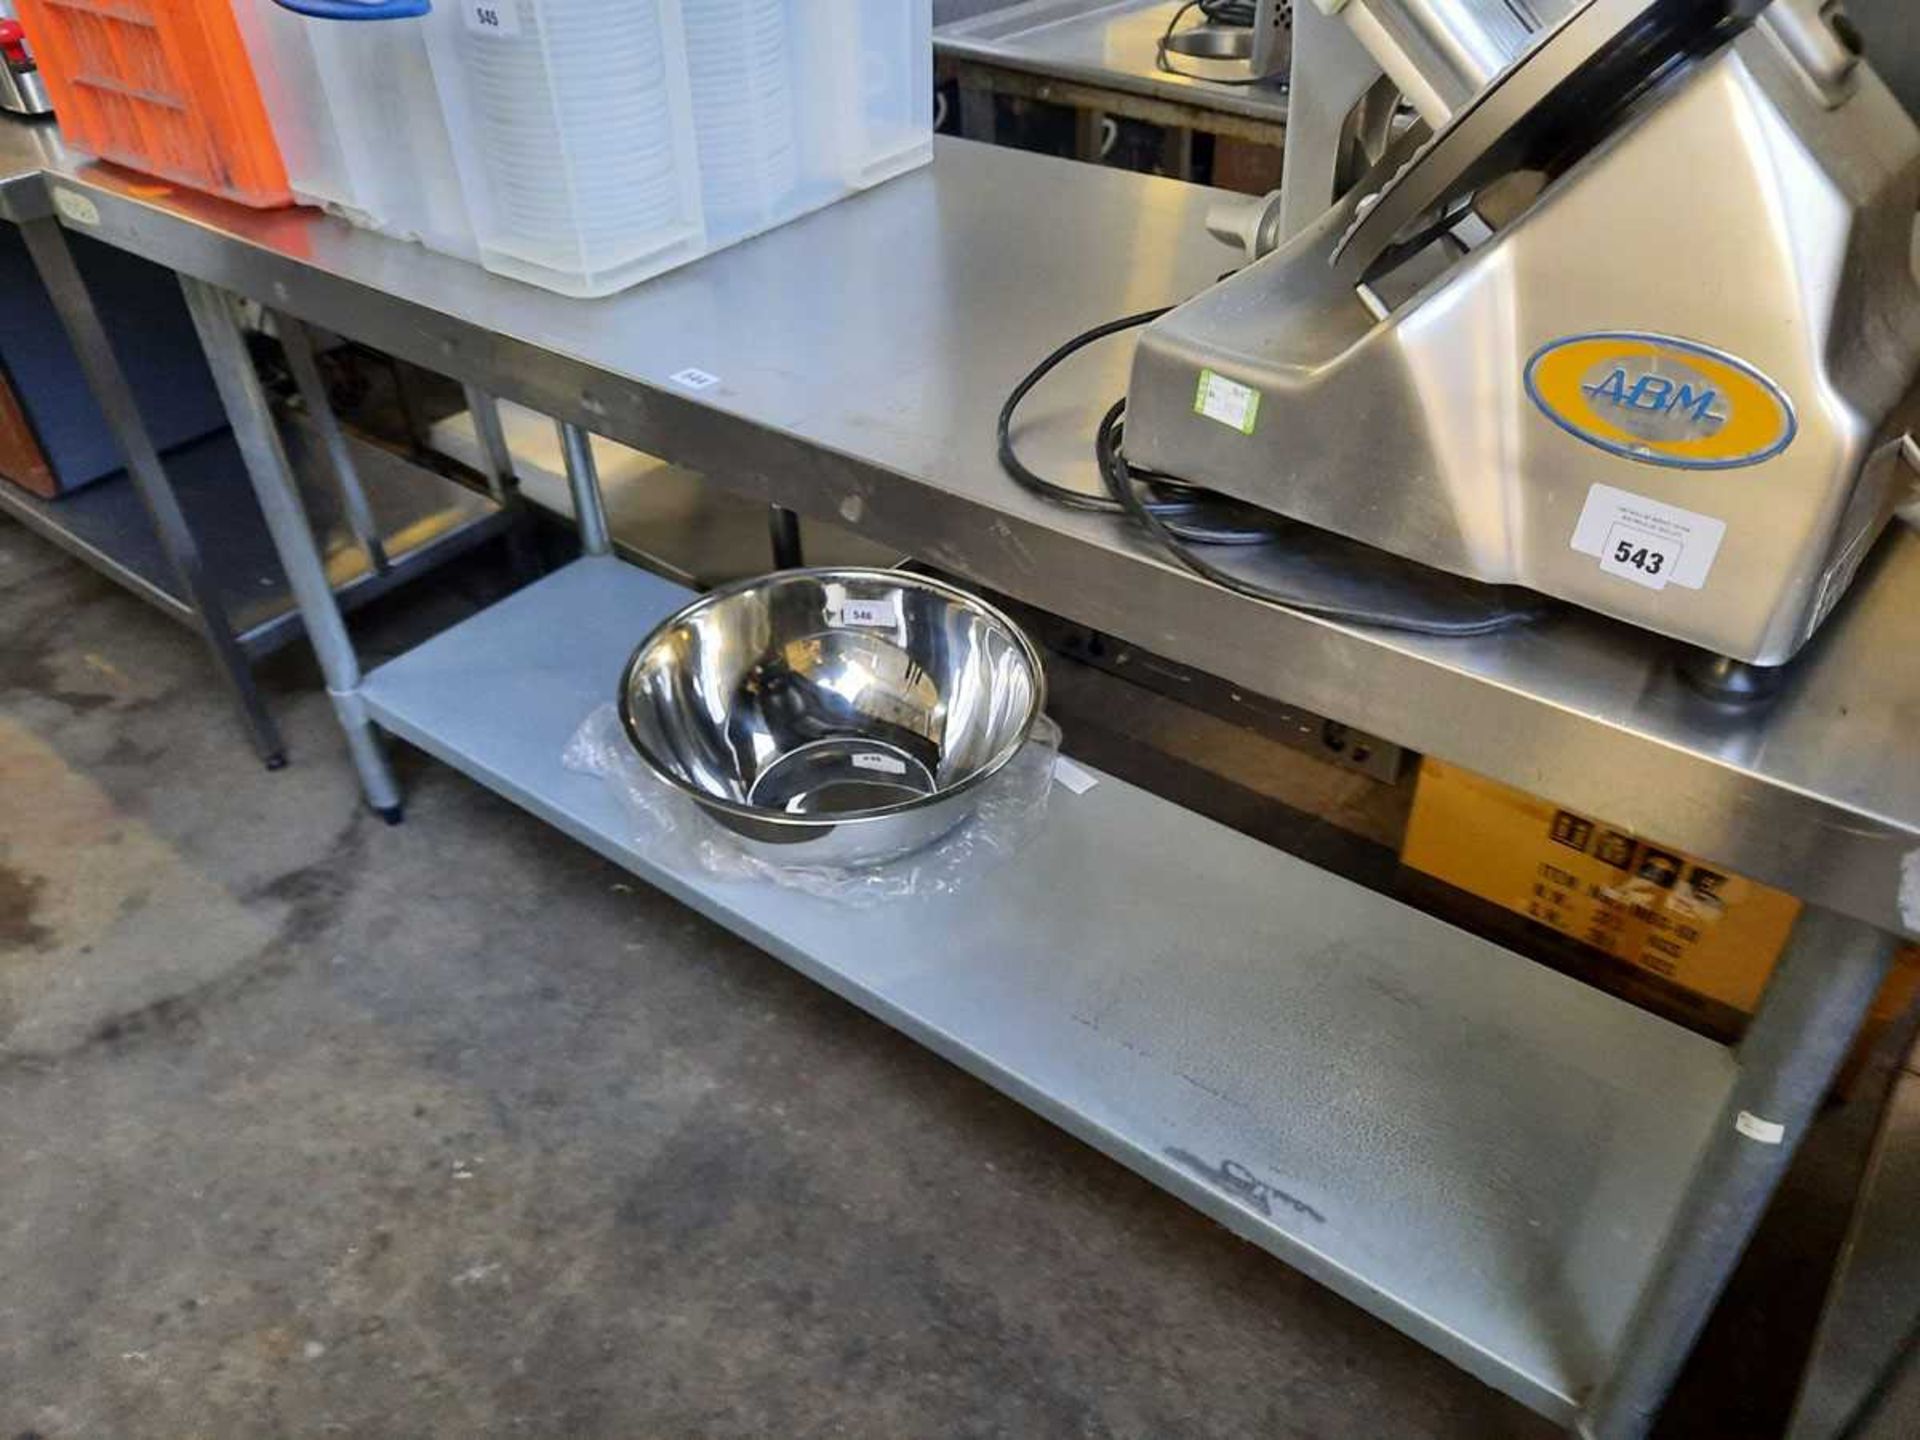 180cm stainless steel preparation table with shelf under